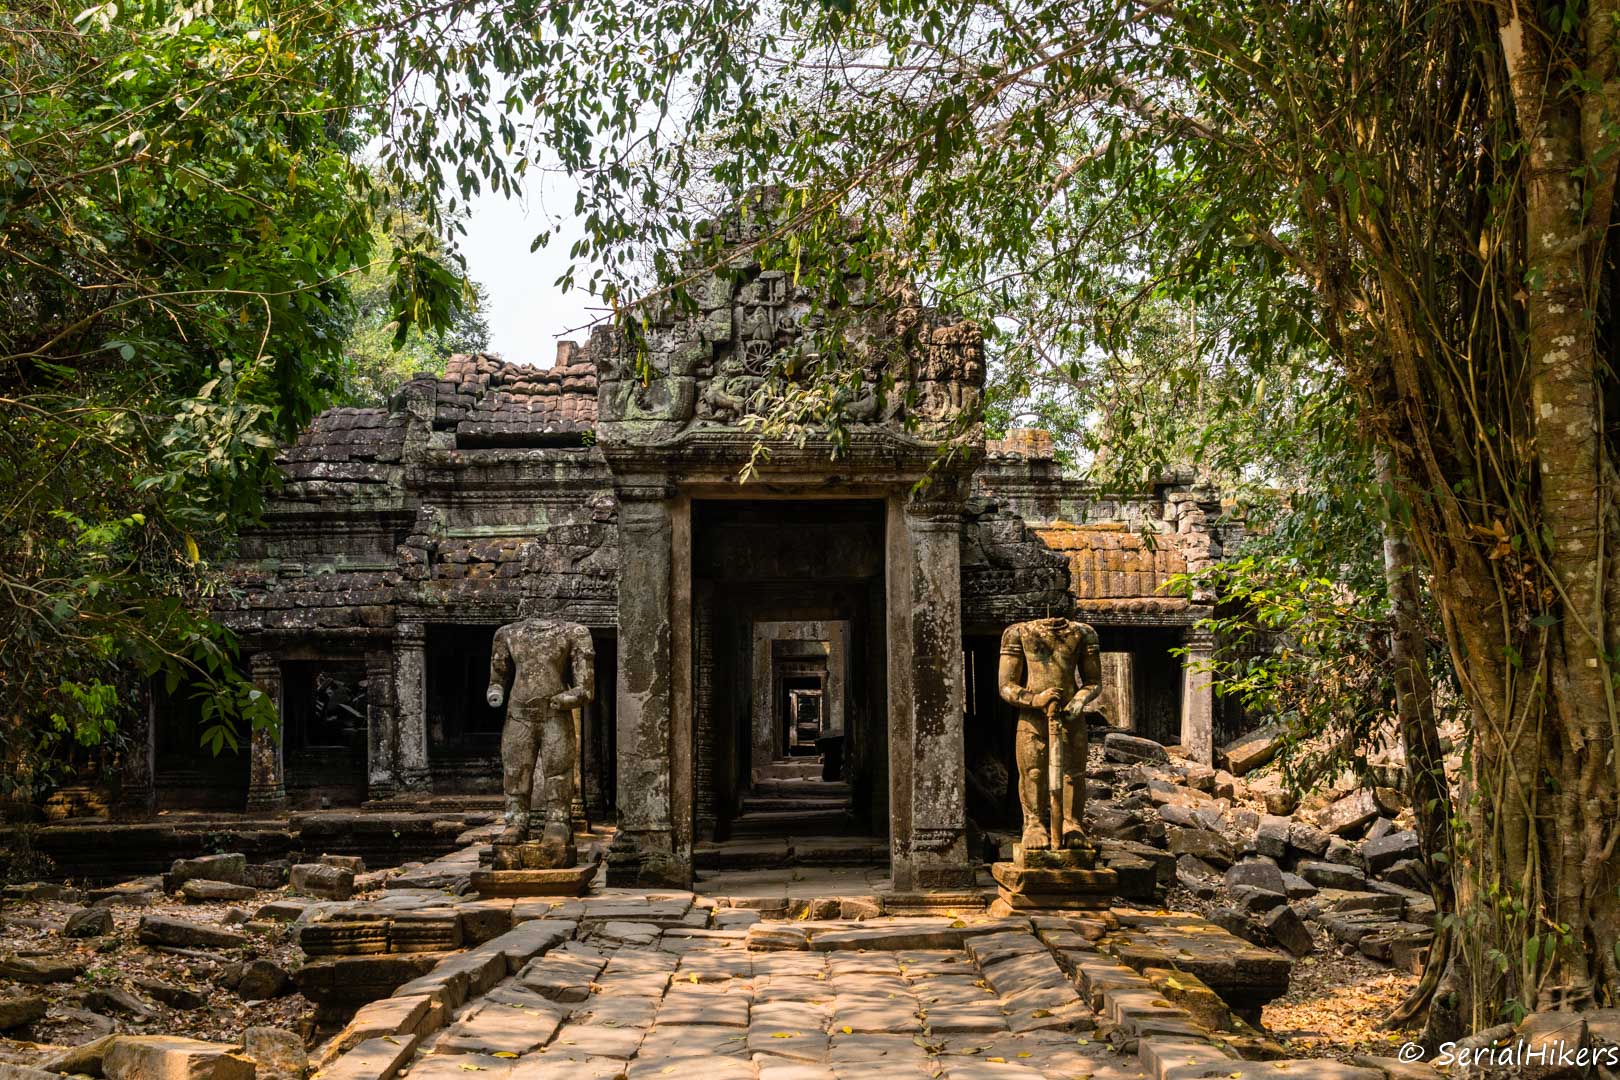 SerialHikers - Alternative Travel Blog SerialHikers - Engaged Travel & Without Flight Angkor Temples: a visit on one-day ticket and a bicycle - Cambodia Cambodia, South East Asia Heritage